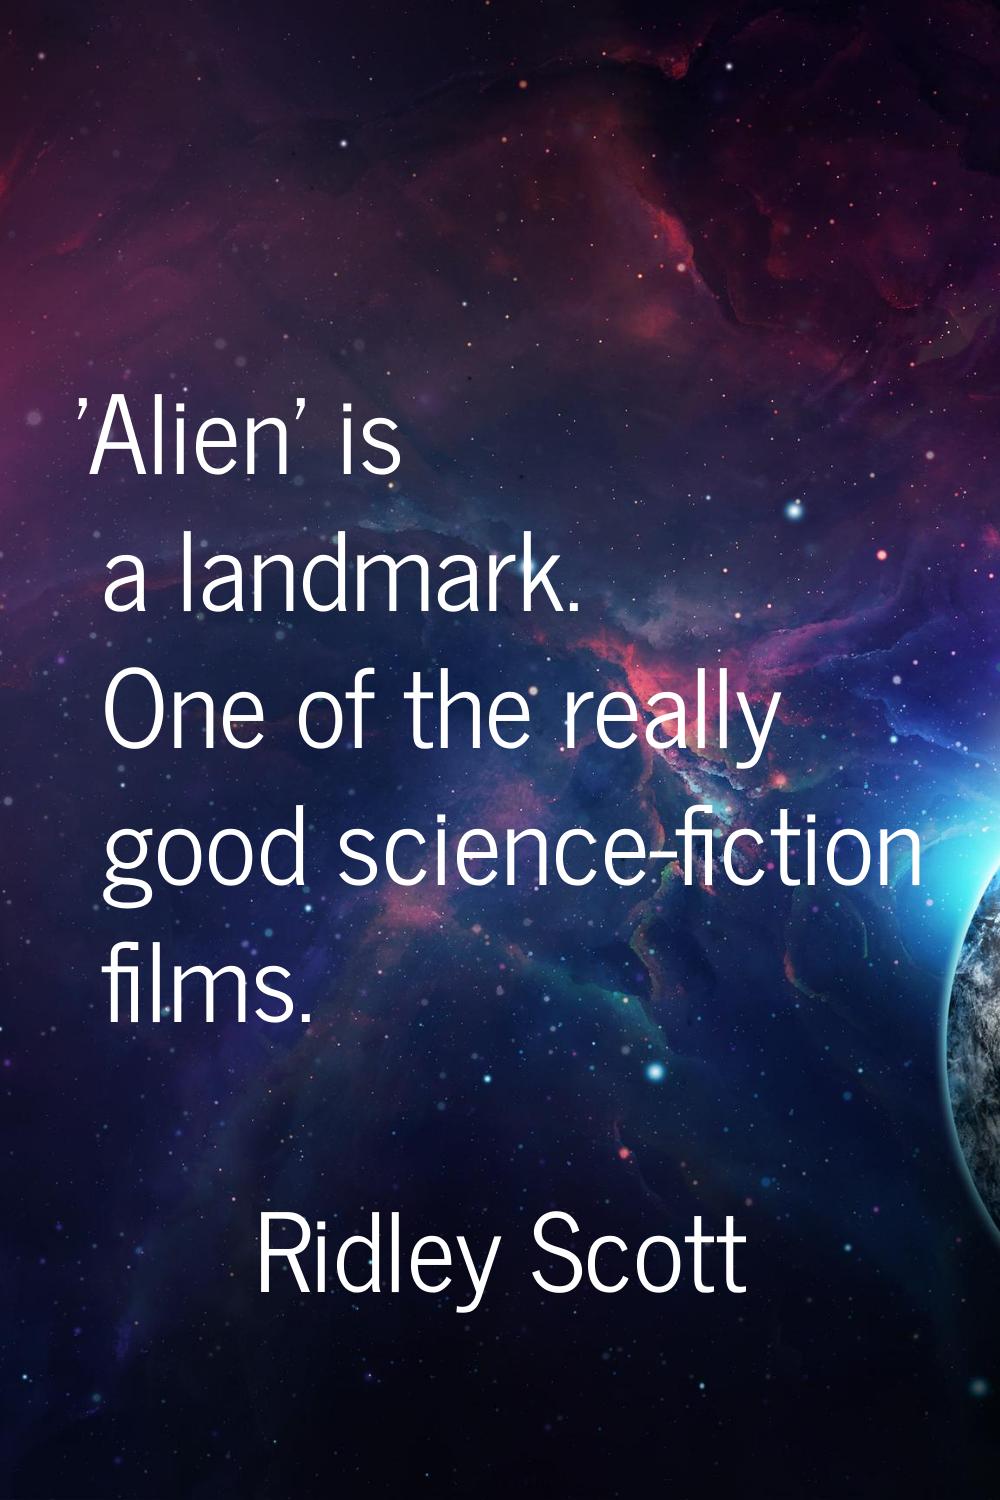 'Alien' is a landmark. One of the really good science-fiction films.